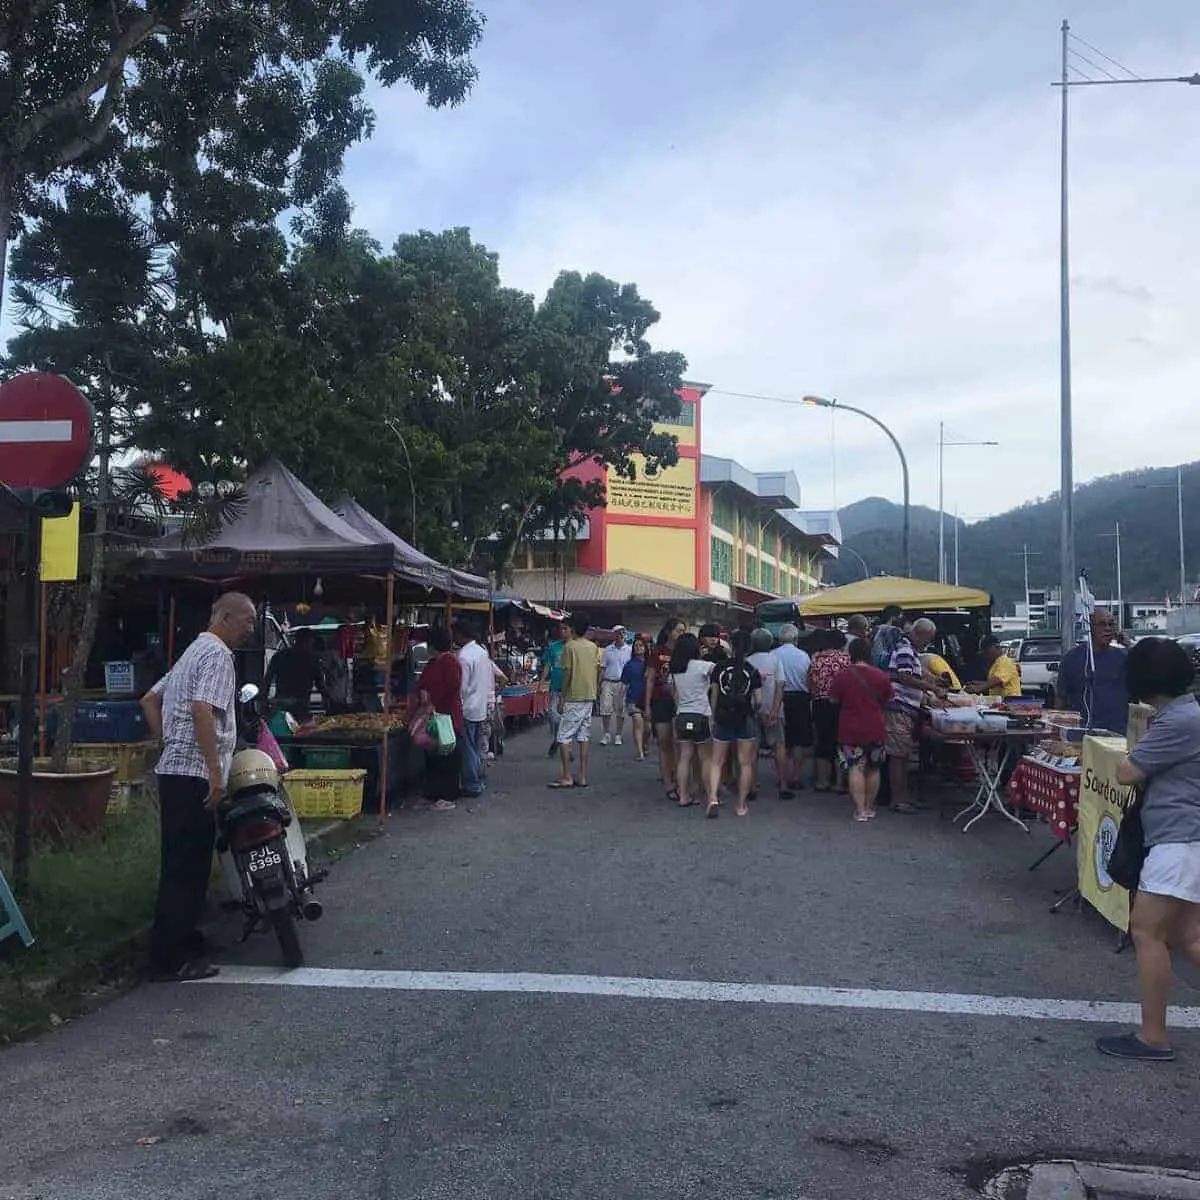 Busy streets of Tanjung Bungah with stalls on every side.